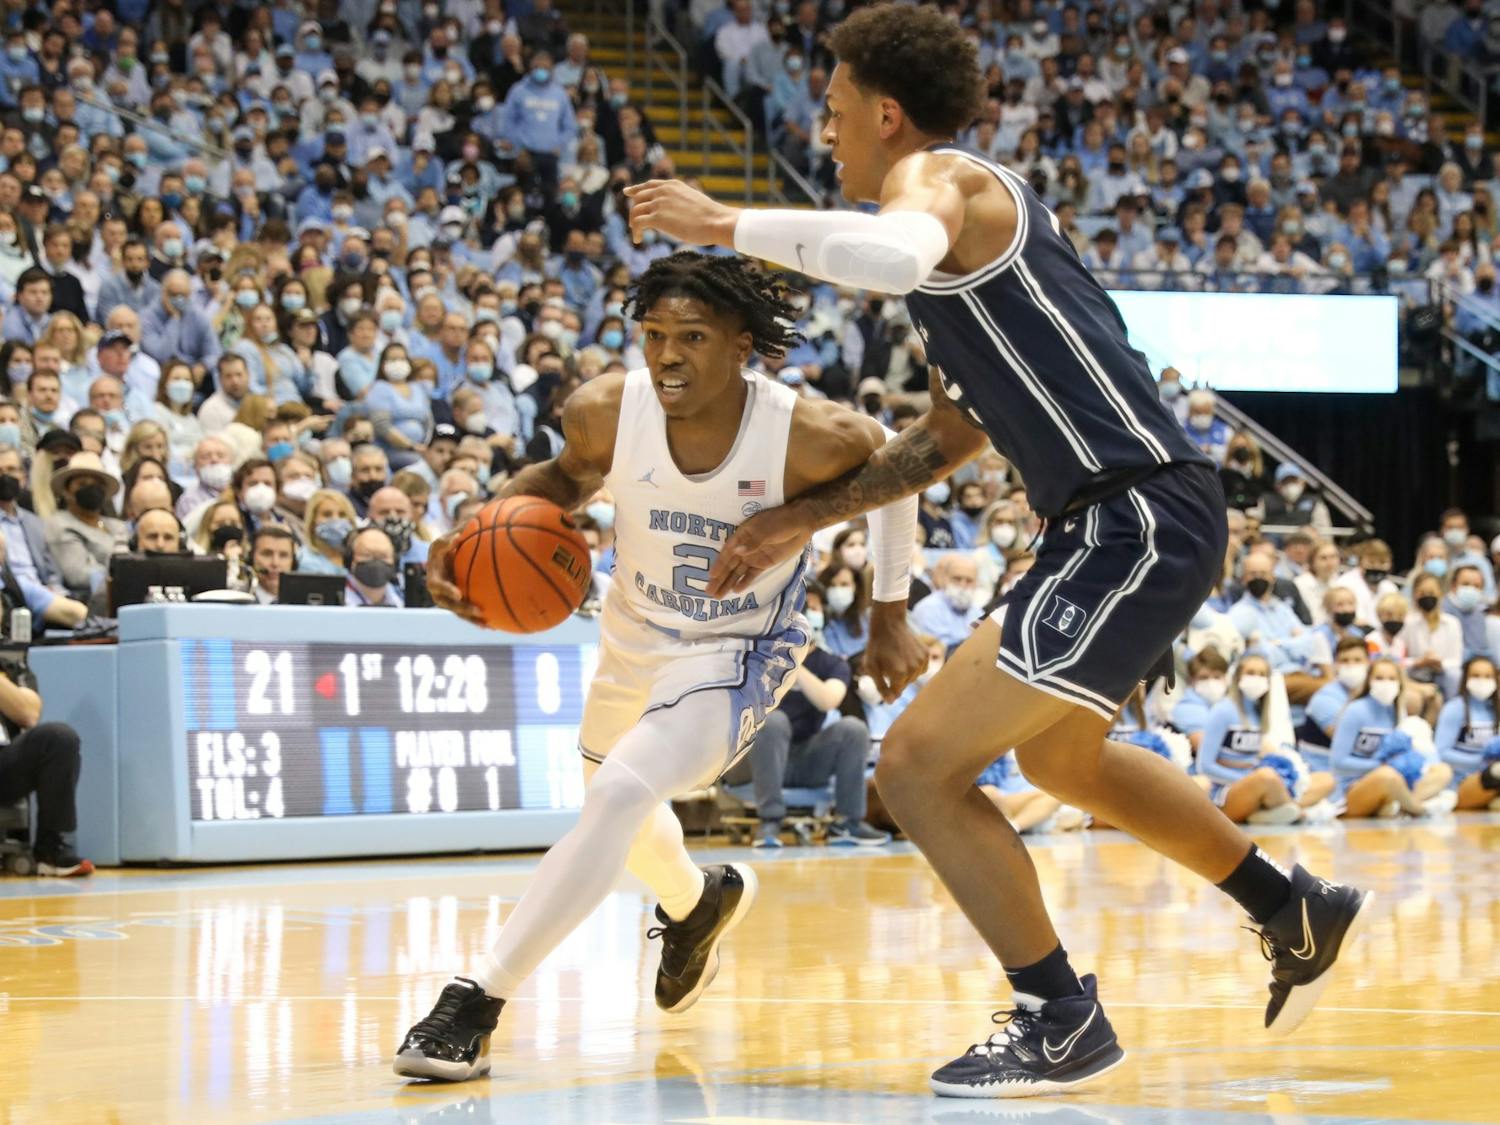 UNC sophomore guard Caleb Love (2) drives past a Duke opponent during a UNC men's basketball game against Duke in the Dean Smith Center on Saturday, Feb. 5, 2022. Duke won 87-67.